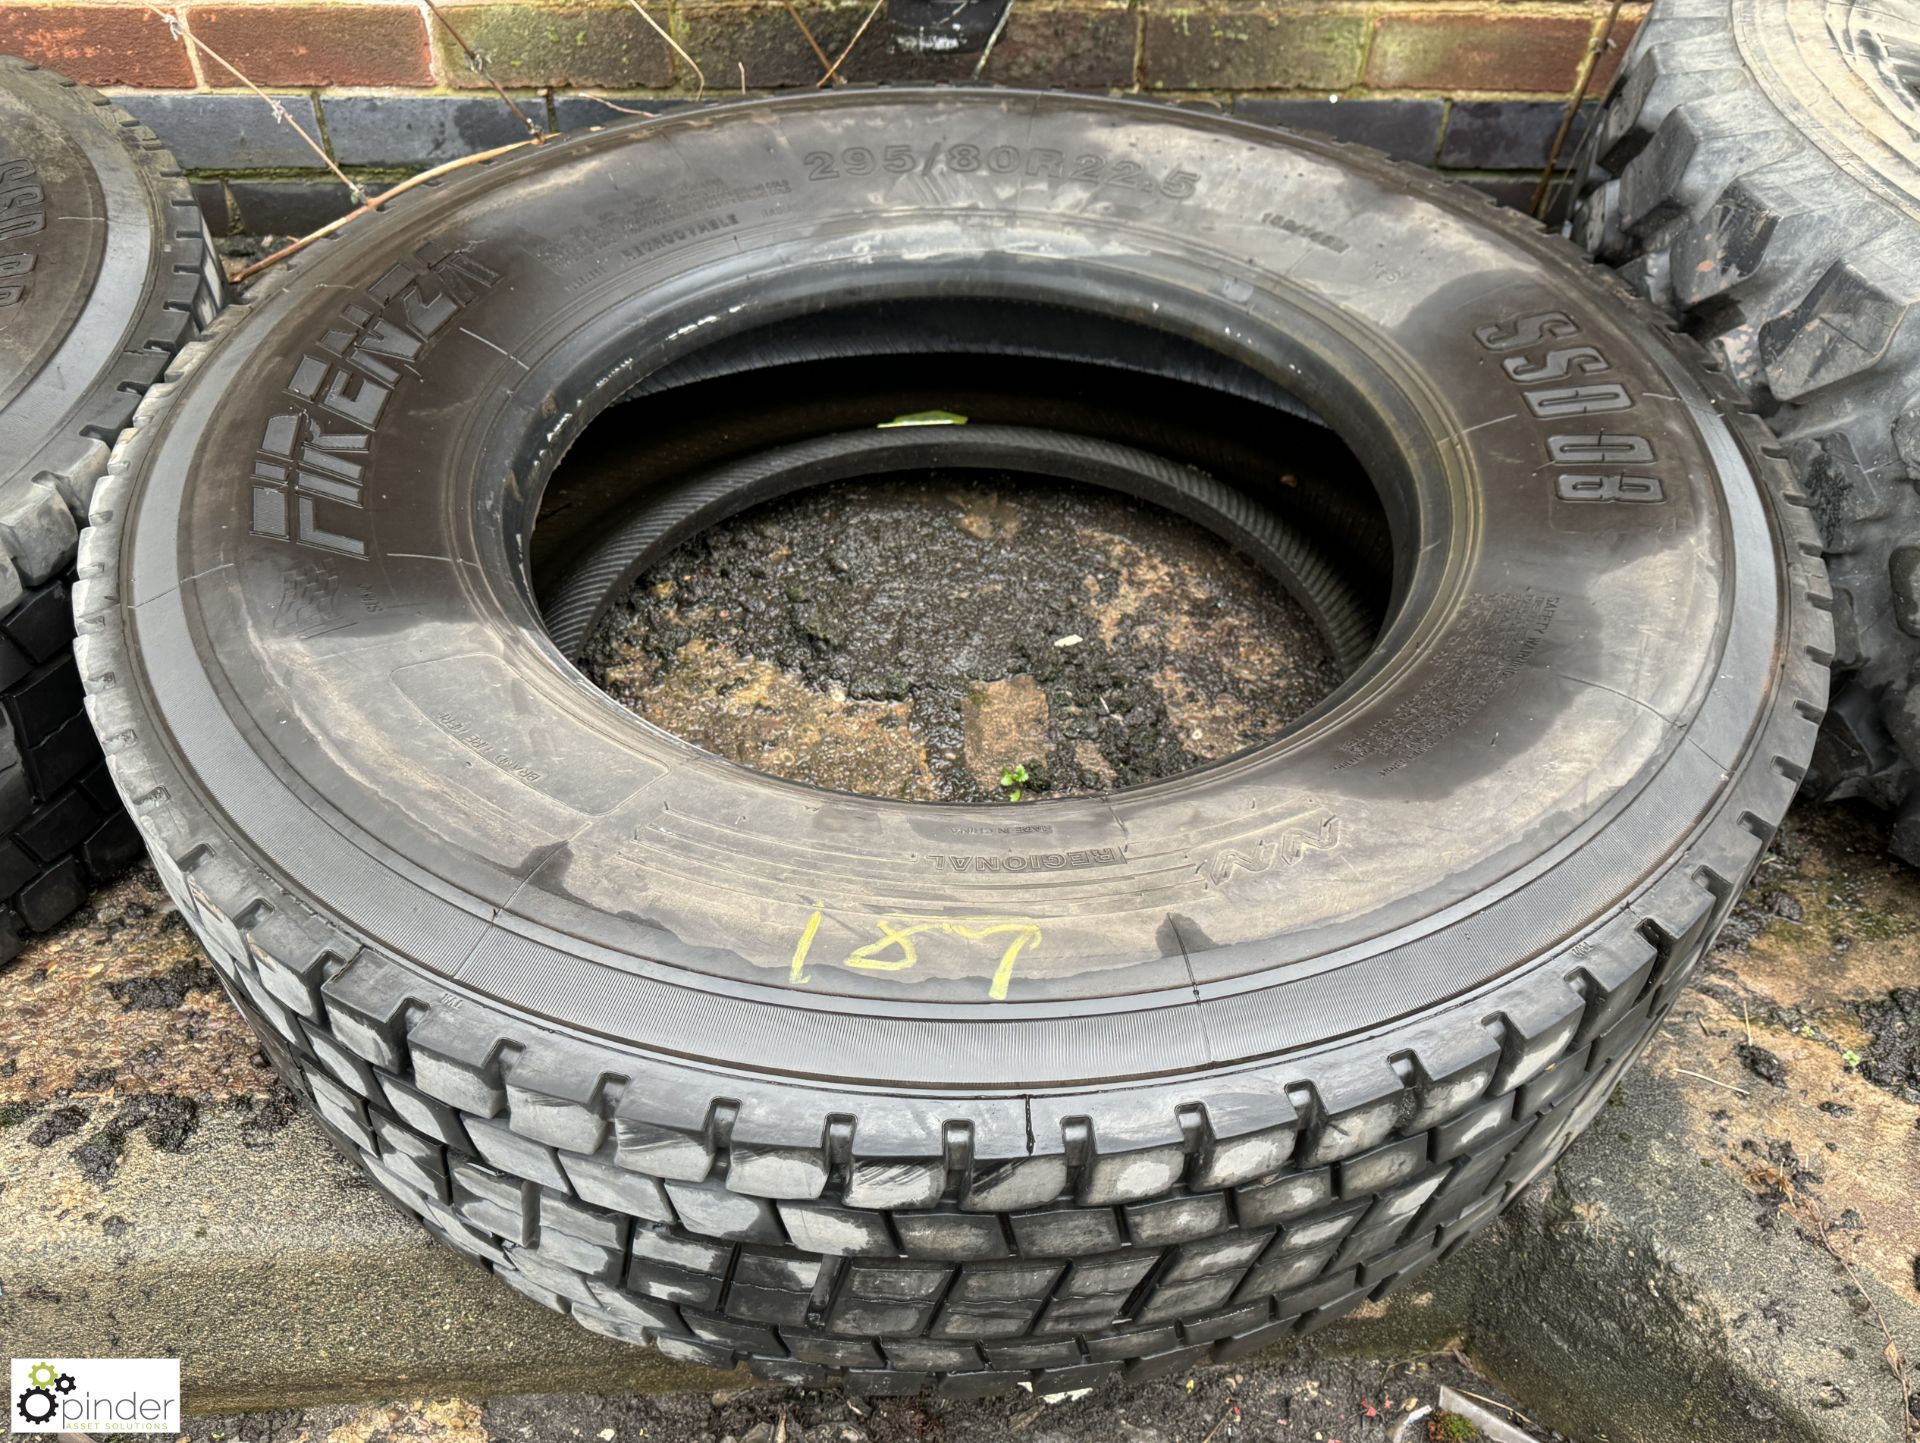 Firenza 295/80R22.5, used (LOCATION: Nottingham – collection Monday 18 March and Tuesday 19 March by